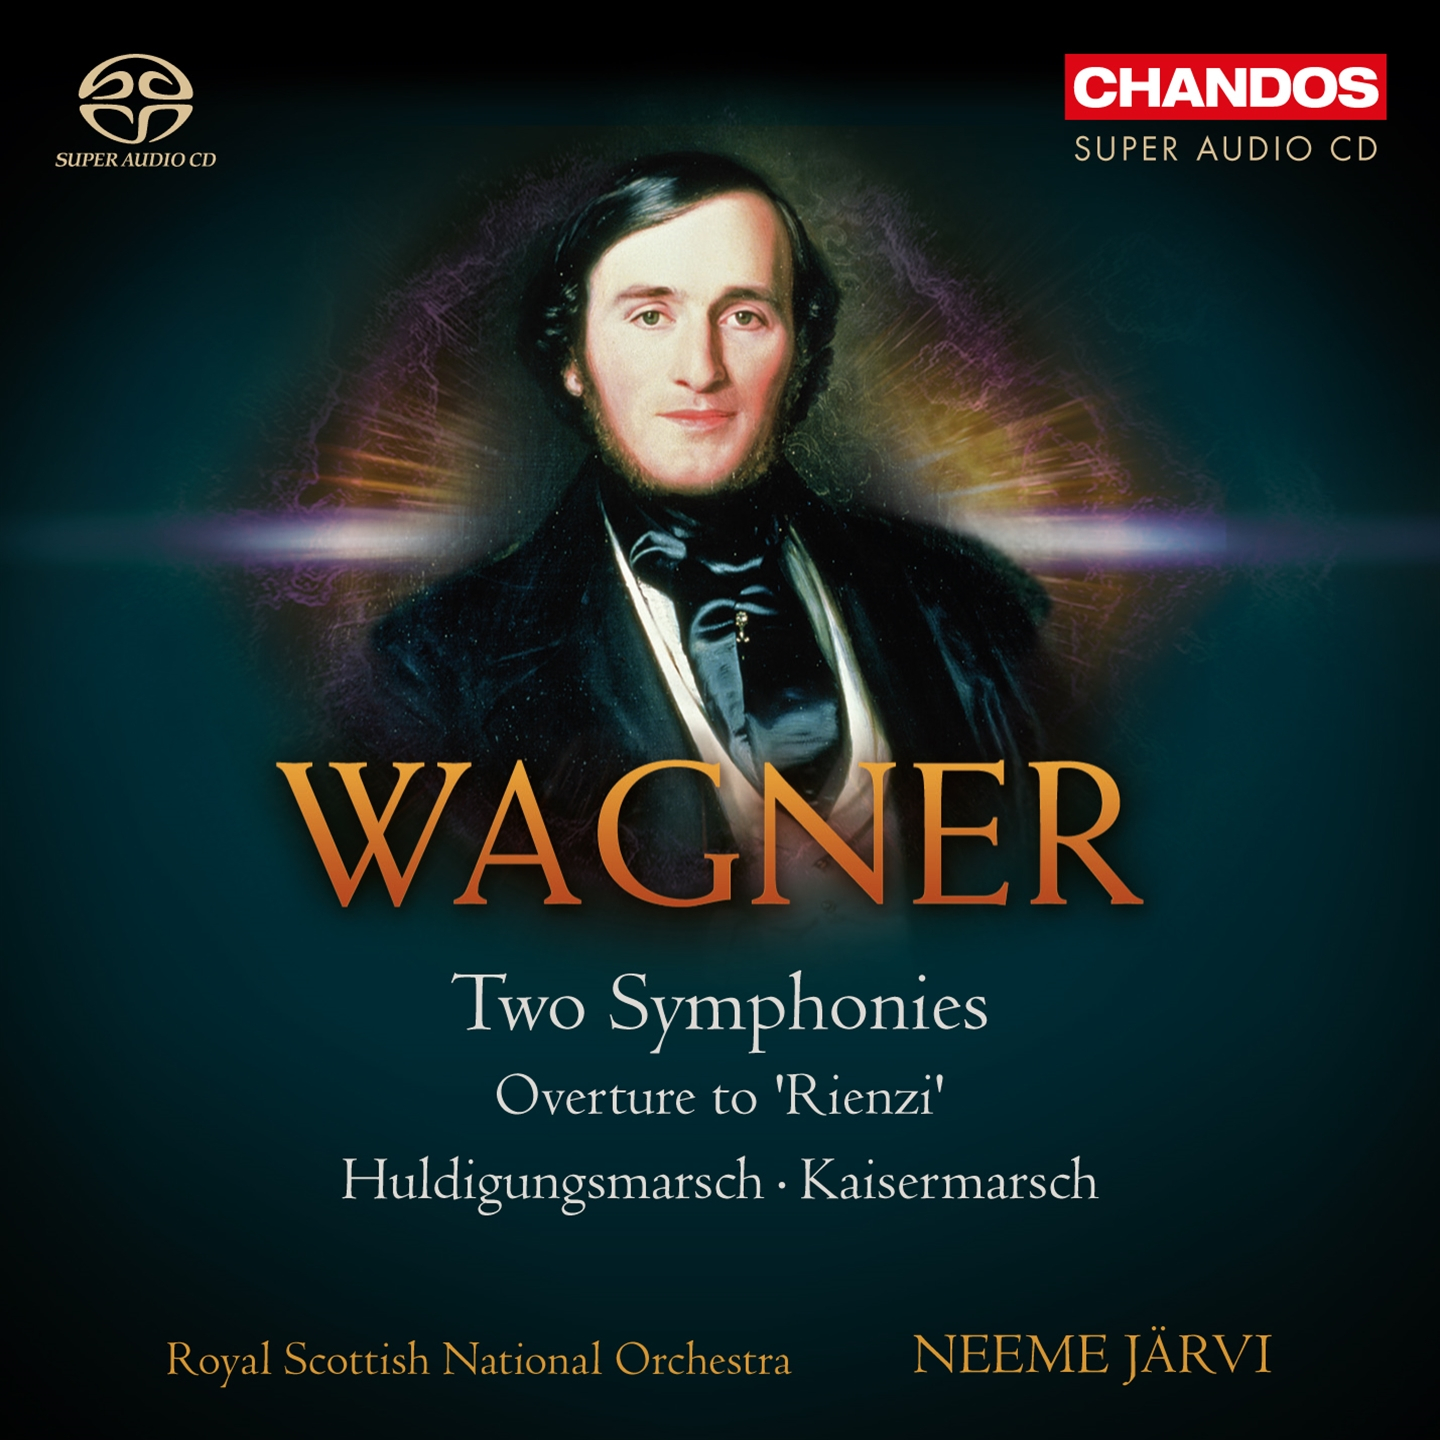 WAGNER: TWO SYMPHONIES